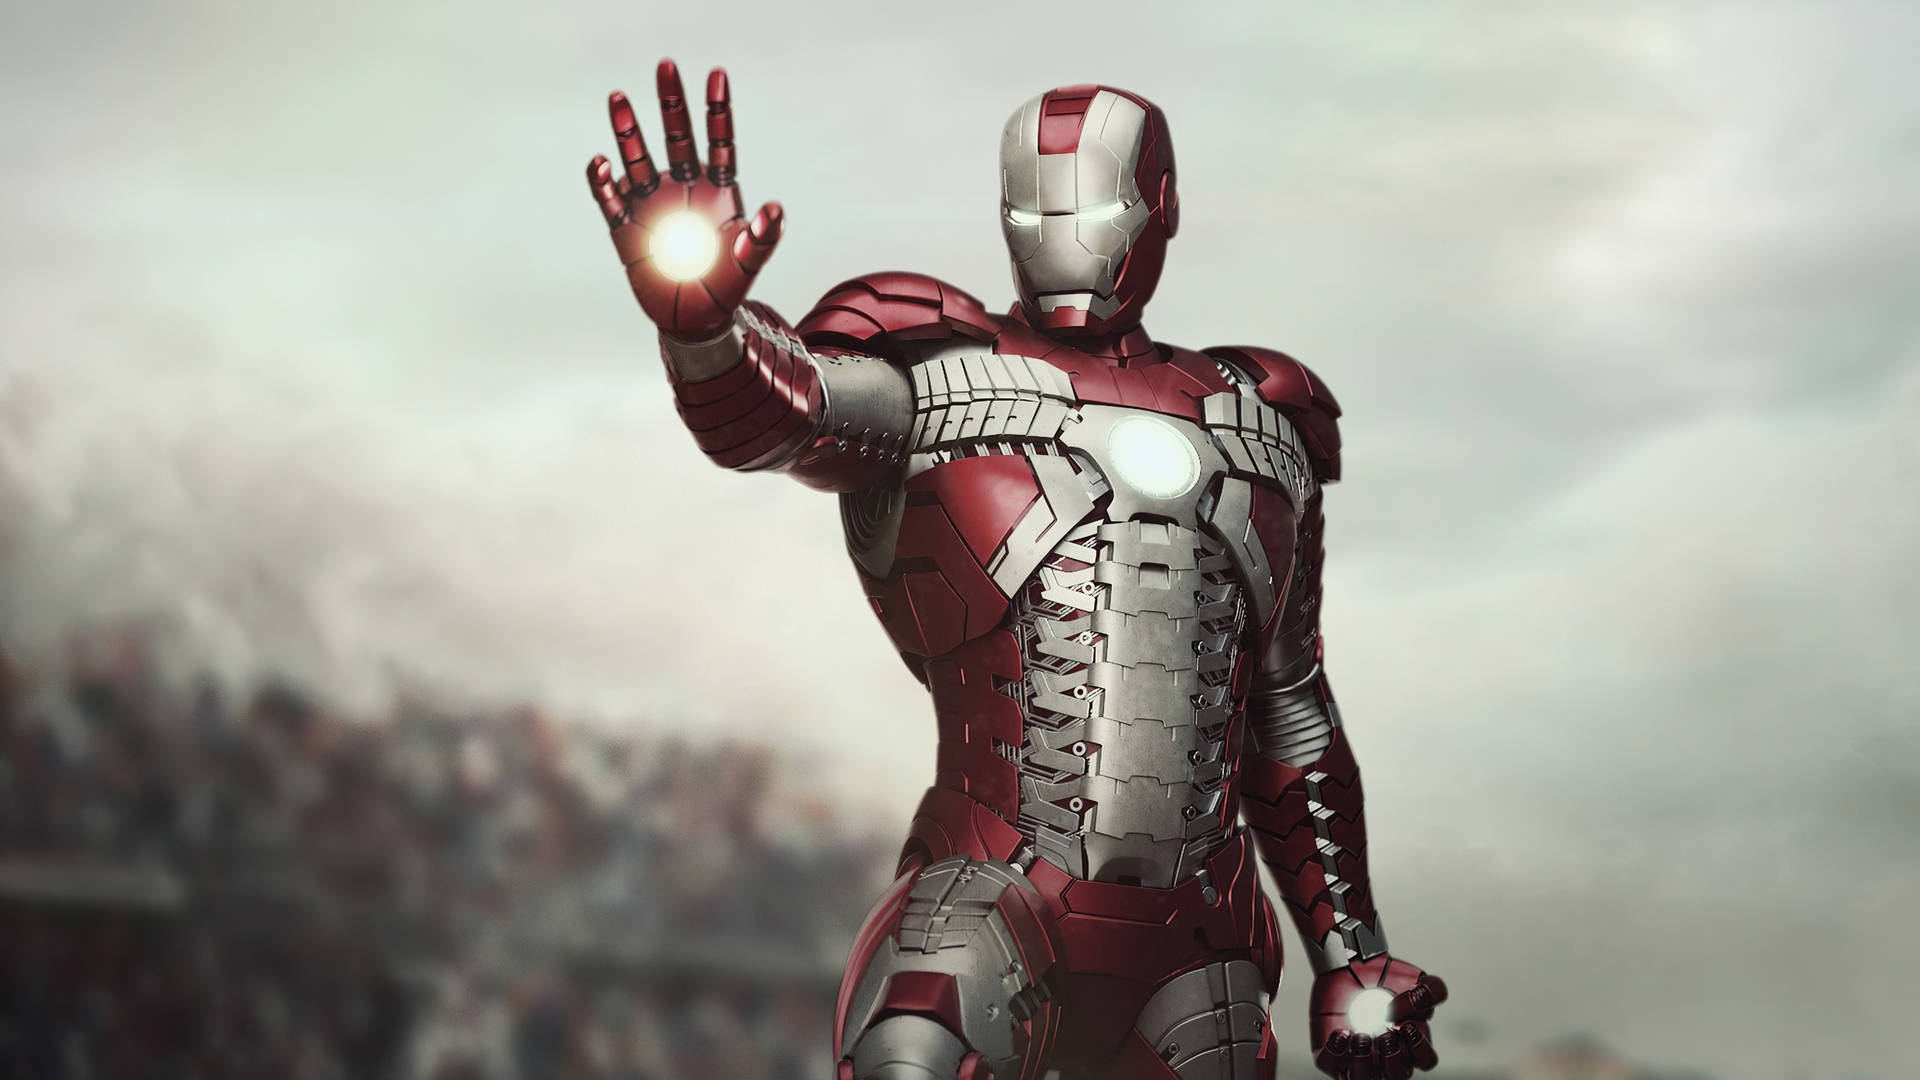 Cool Iron Man Red Silver Suit Background